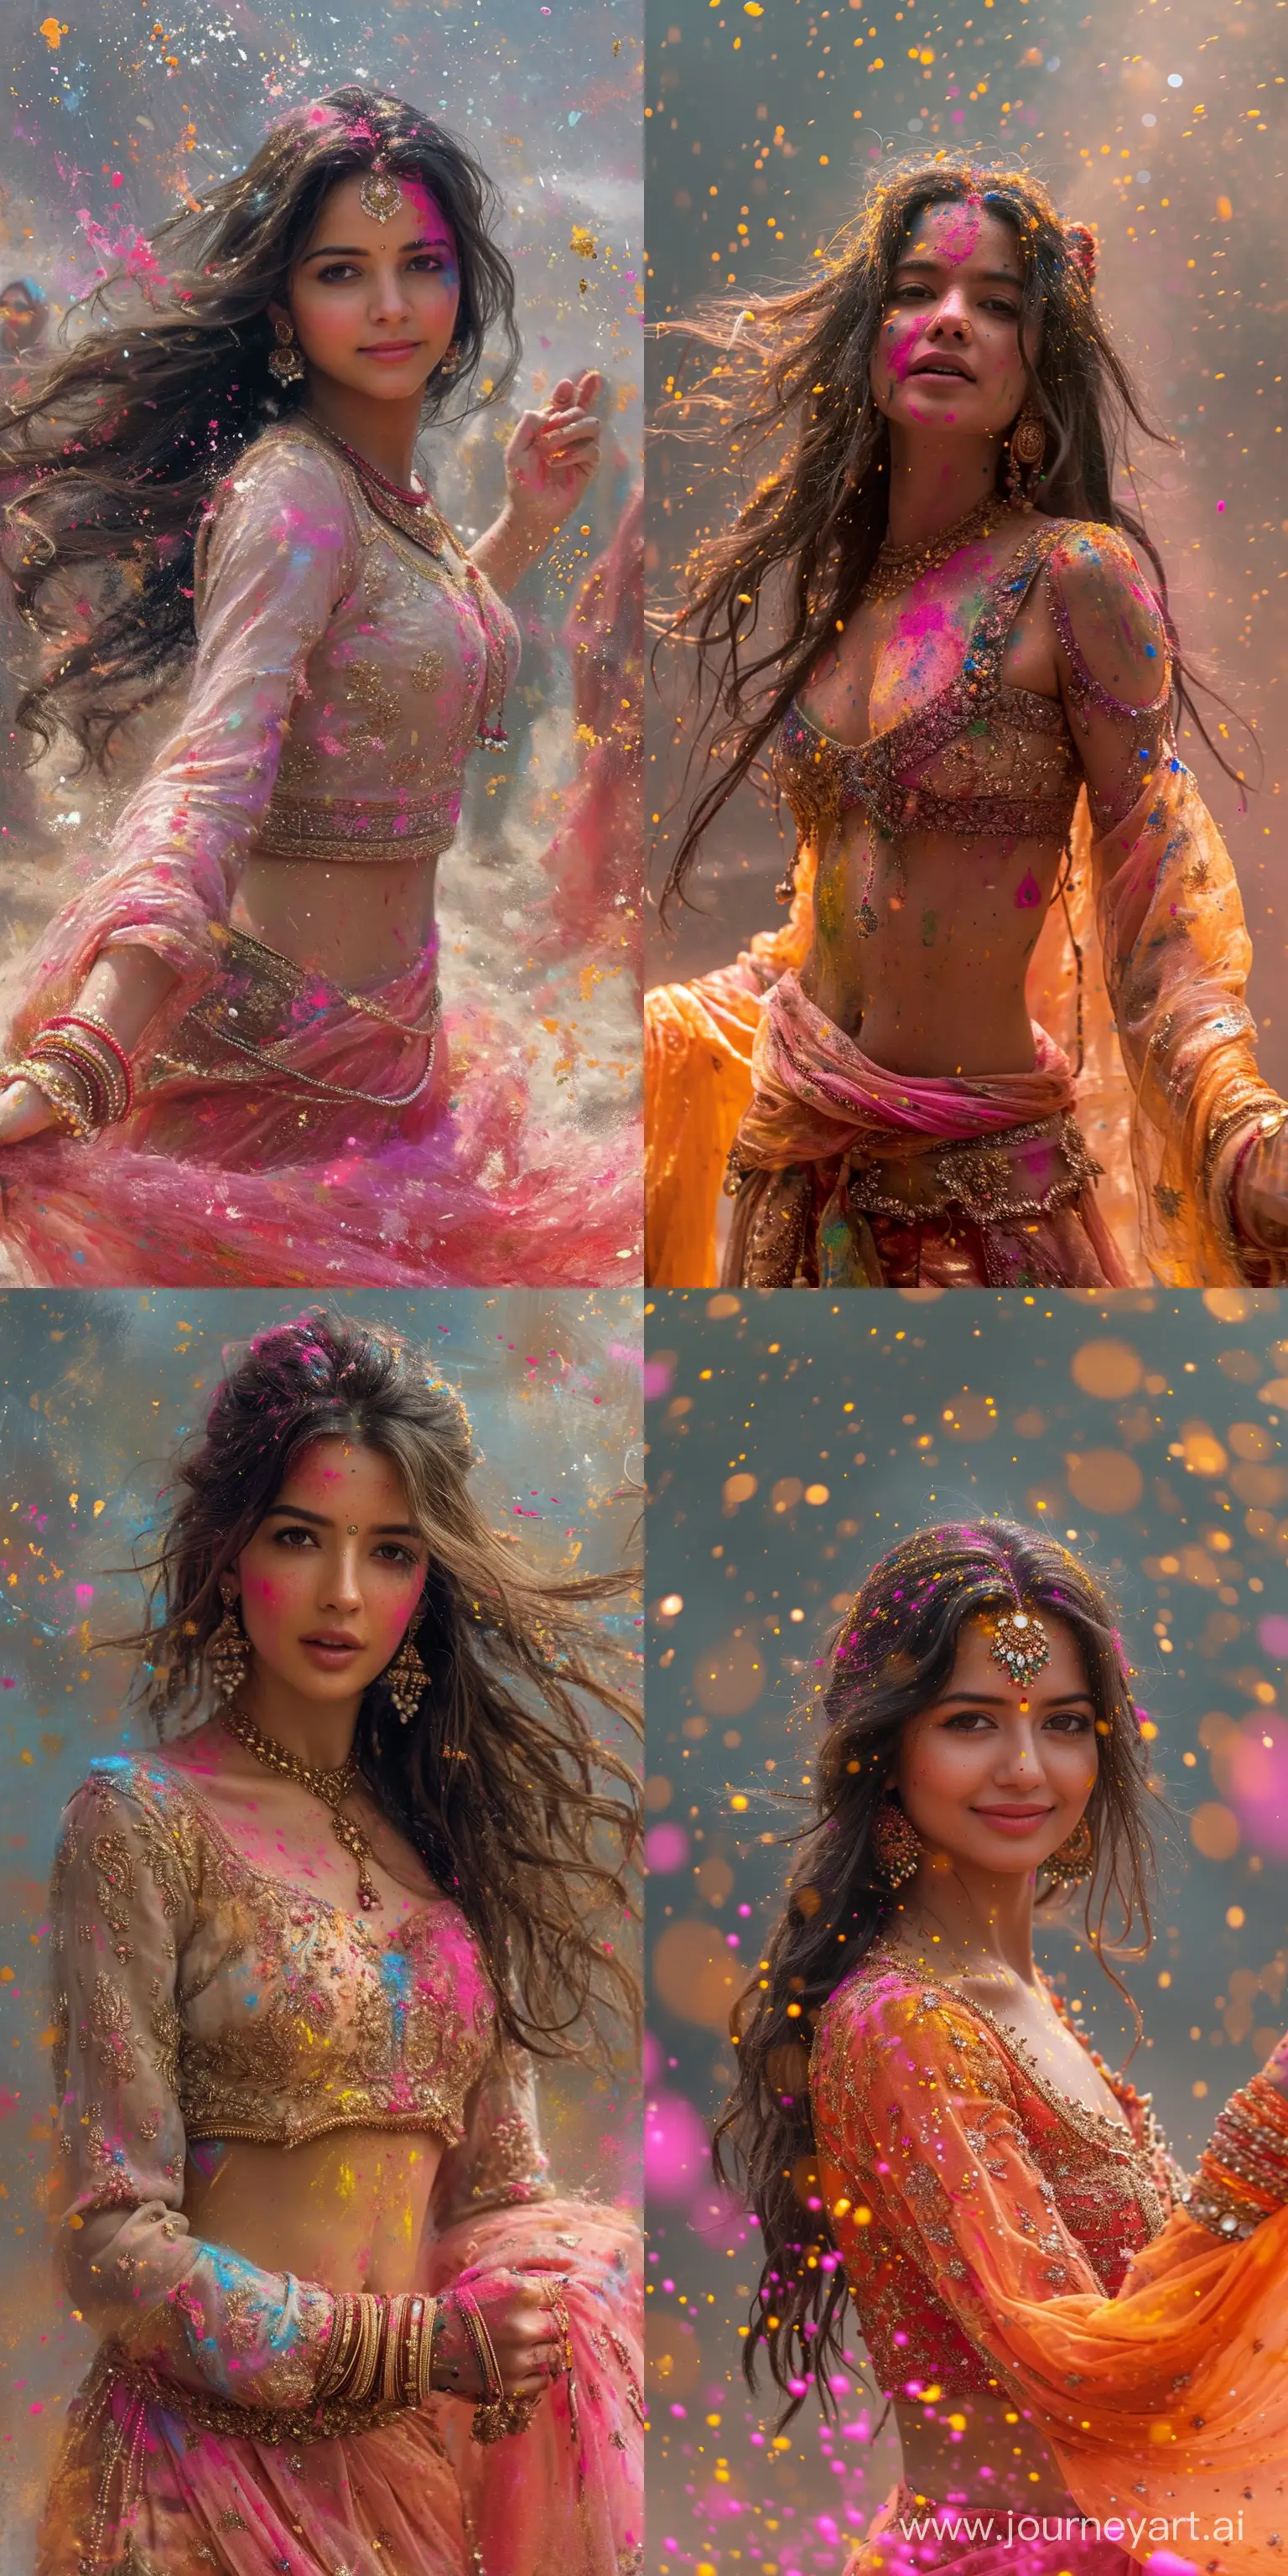 Vibrant-Holi-Celebration-with-Expressive-Punjabi-Woman-in-Light-Gray-and-Bronze-Style